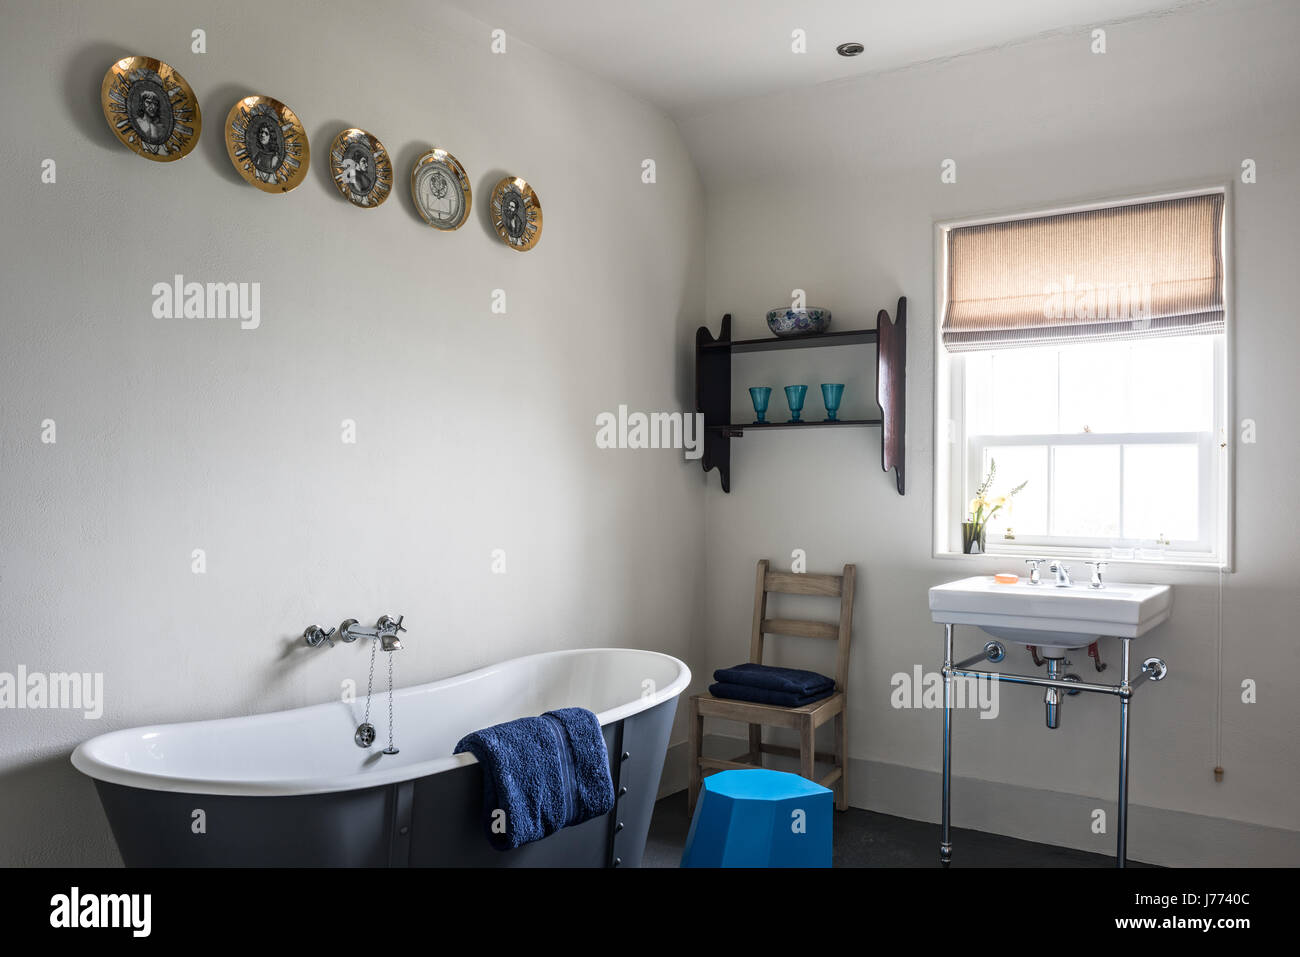 Decorative plates above grey freestanding bath in 17th century stone cottage bathroom, with stool by Martino Gamper Stock Photo